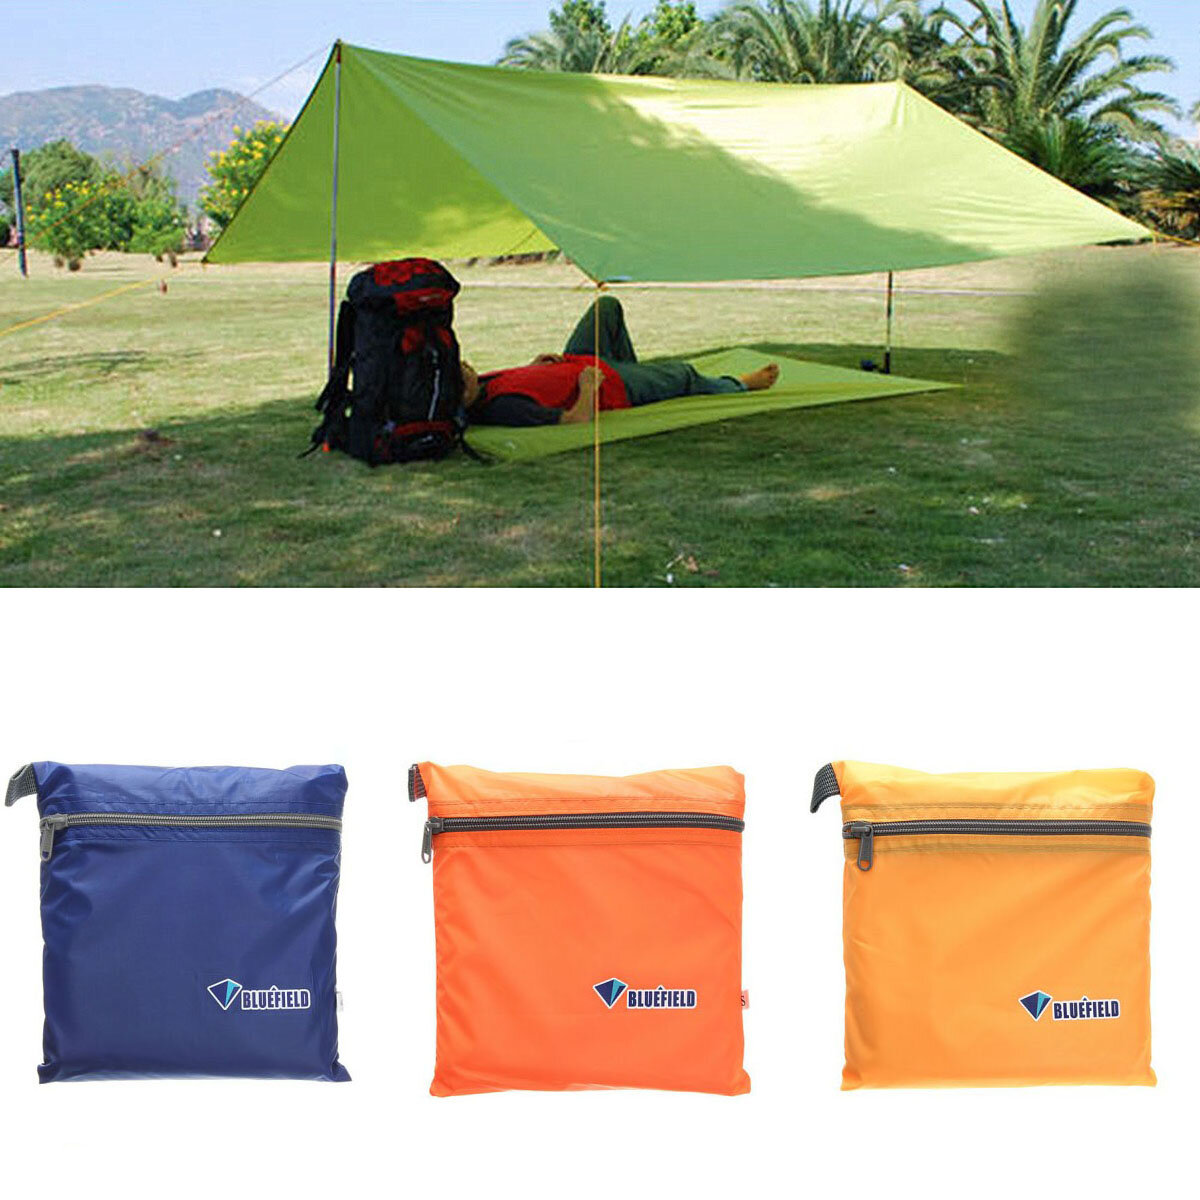 IPRee™ 250x150CM Portable Camping Tent Sunshade Outdoor Waterproof Shelter Canopy Tentage